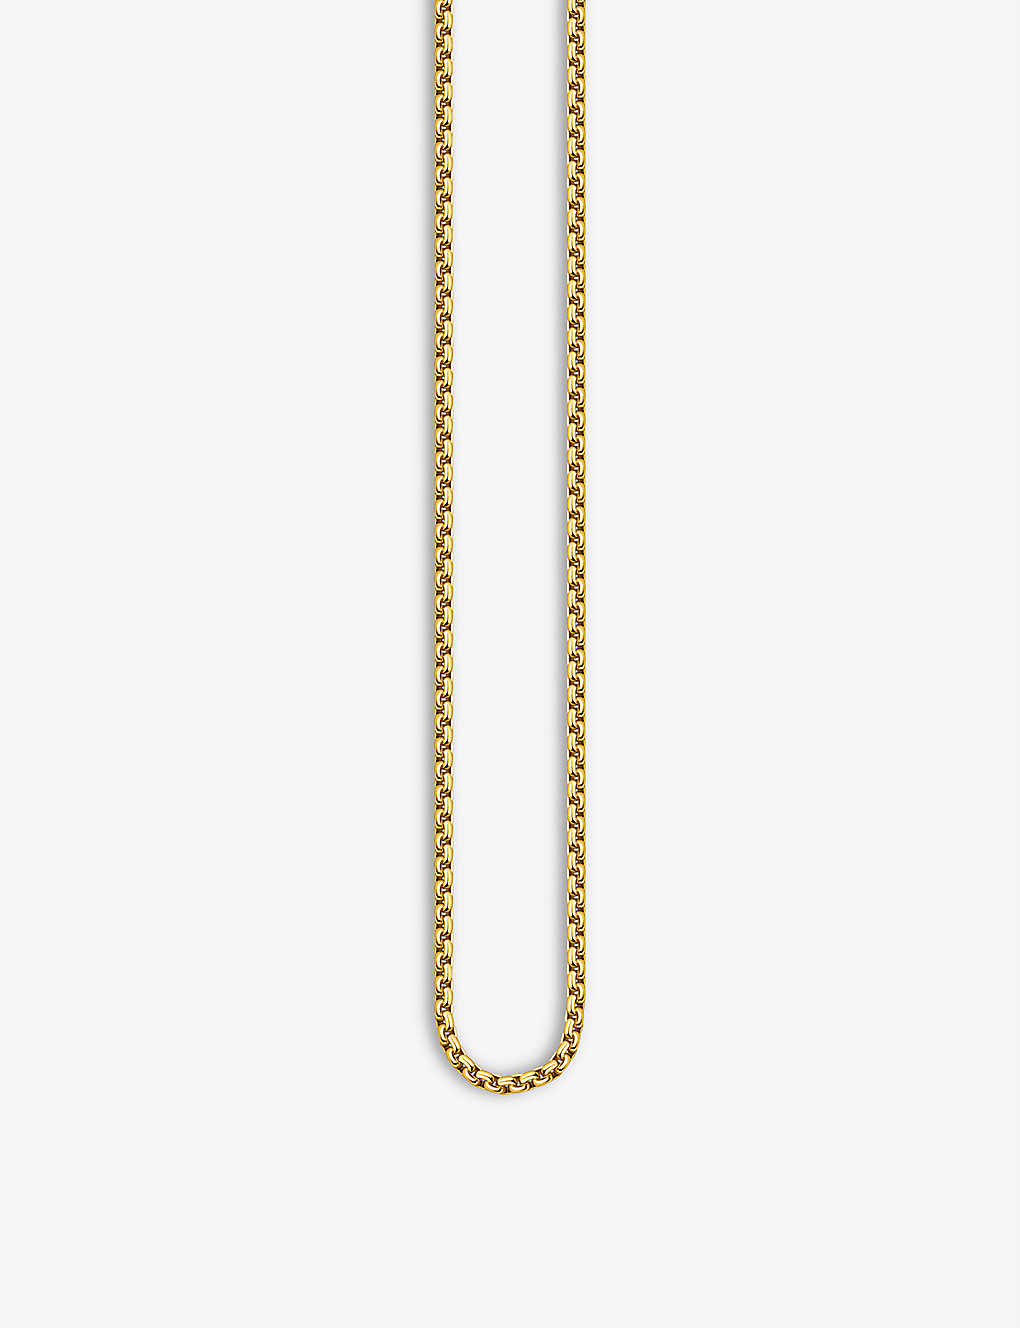 Thomas Sabo Venezia 18ct Yellow Gold-plated Sterling Silver Chain Necklace